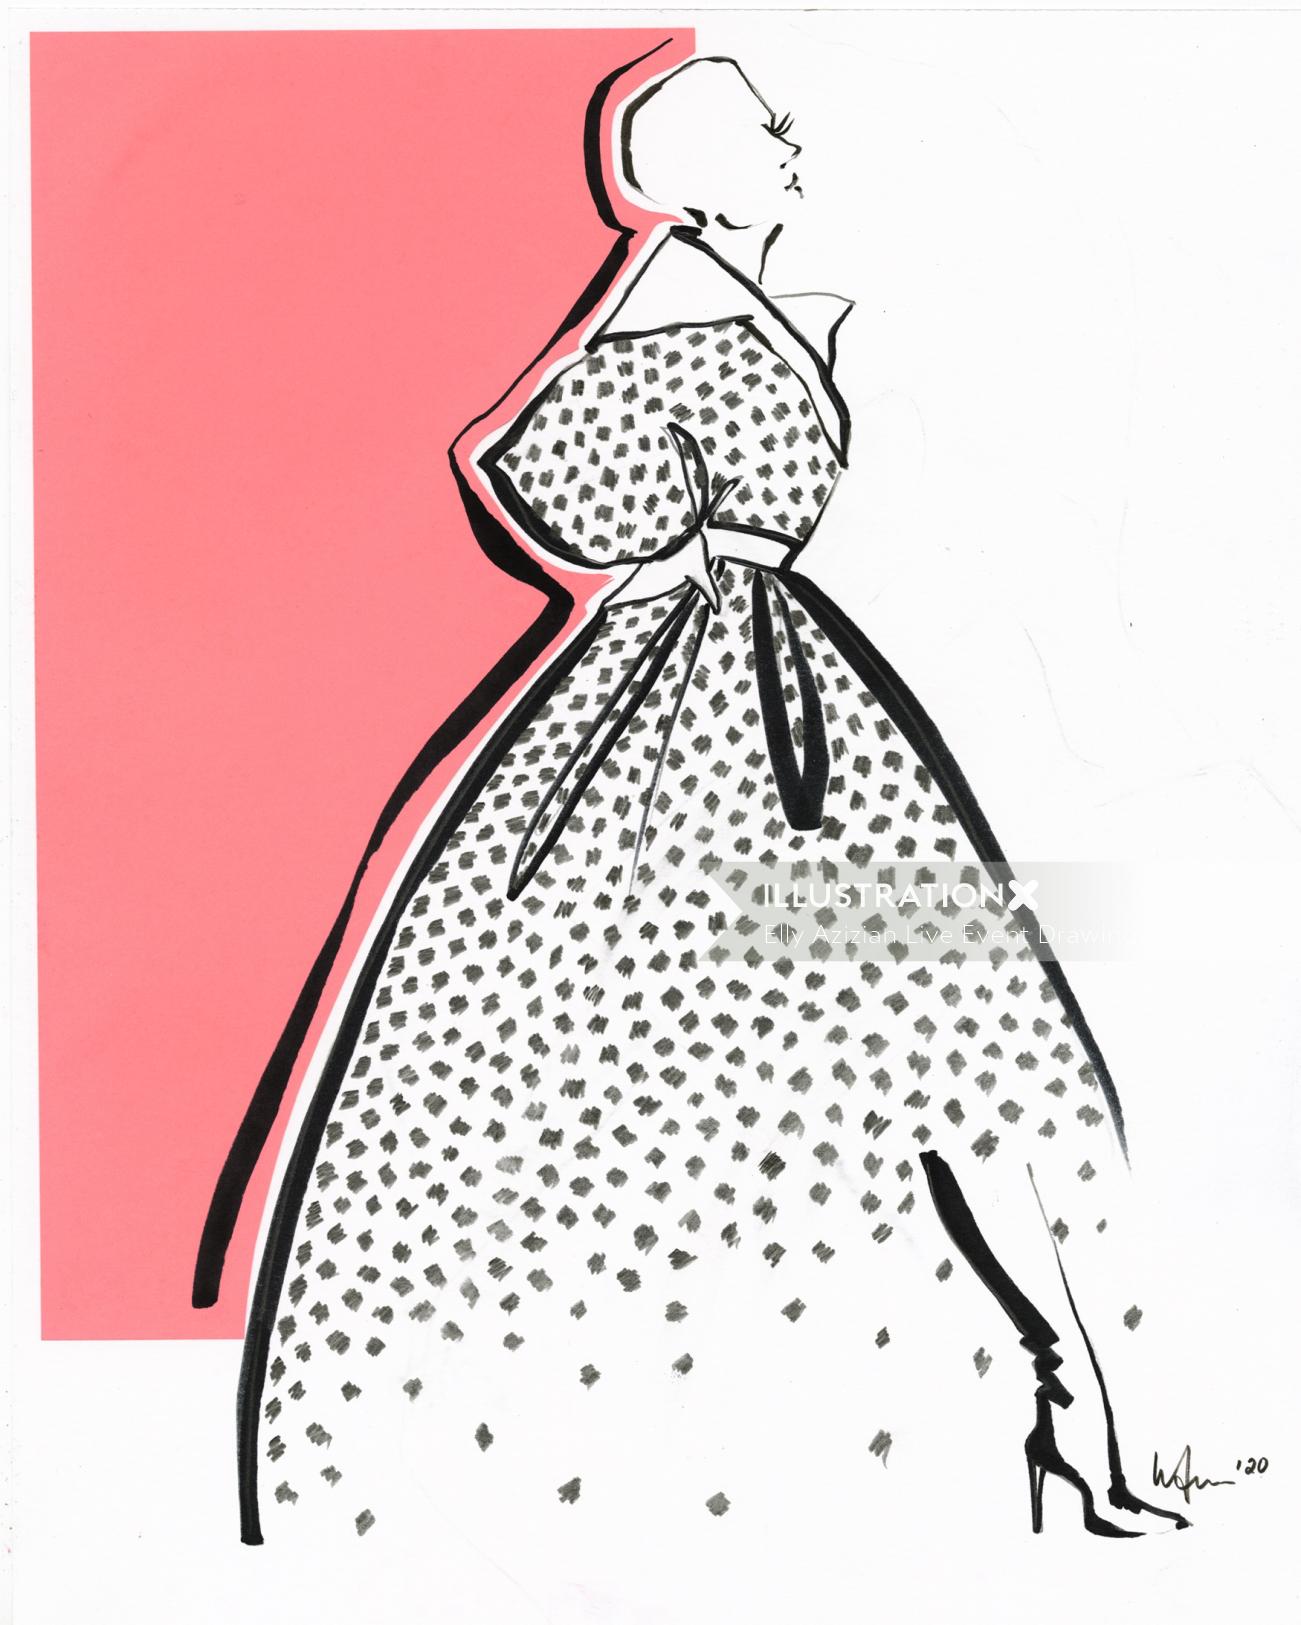 Live Drawing of women with dotted dress
